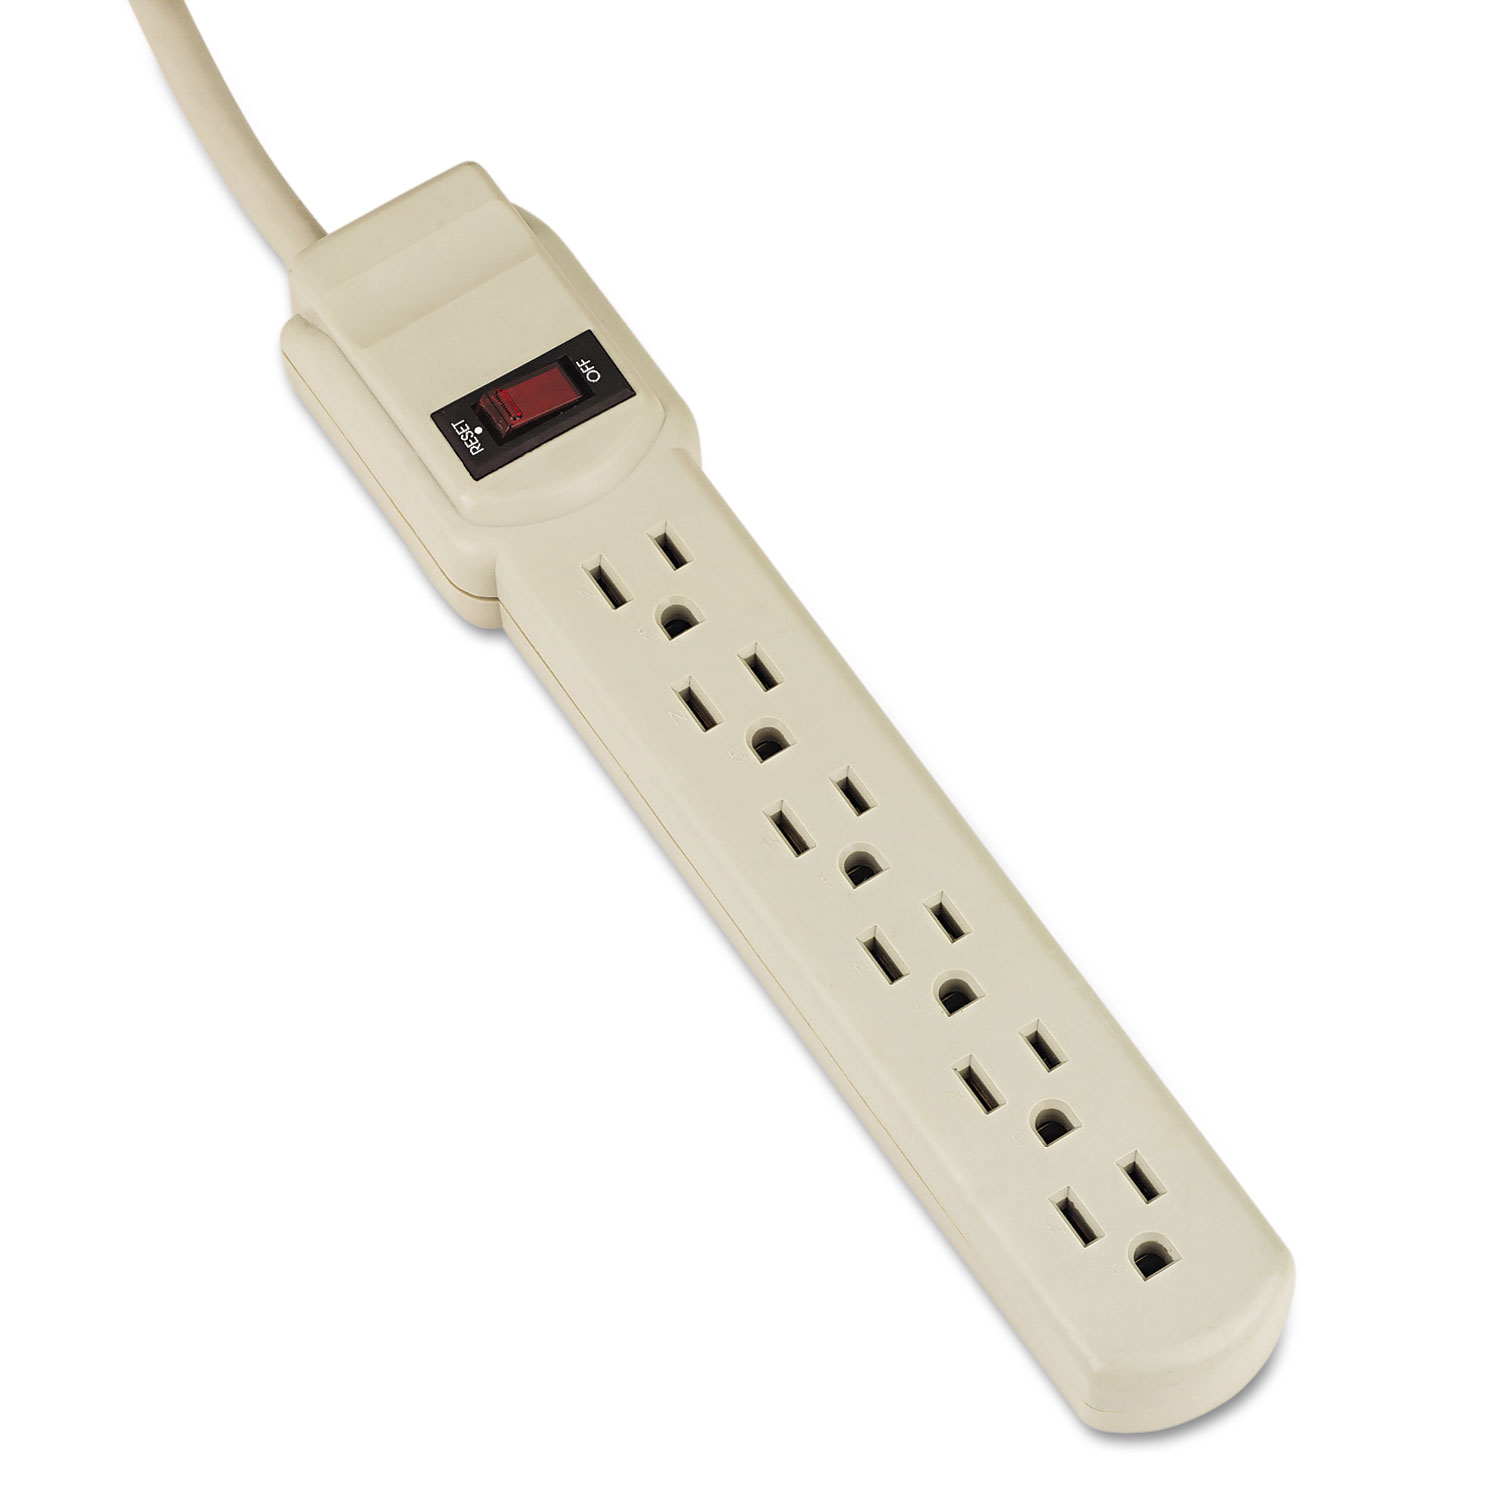 Six-Outlet Power Strip, 4-Foot Cord, 1-15/16 x 10-3/16 x 1-3/16, Ivory